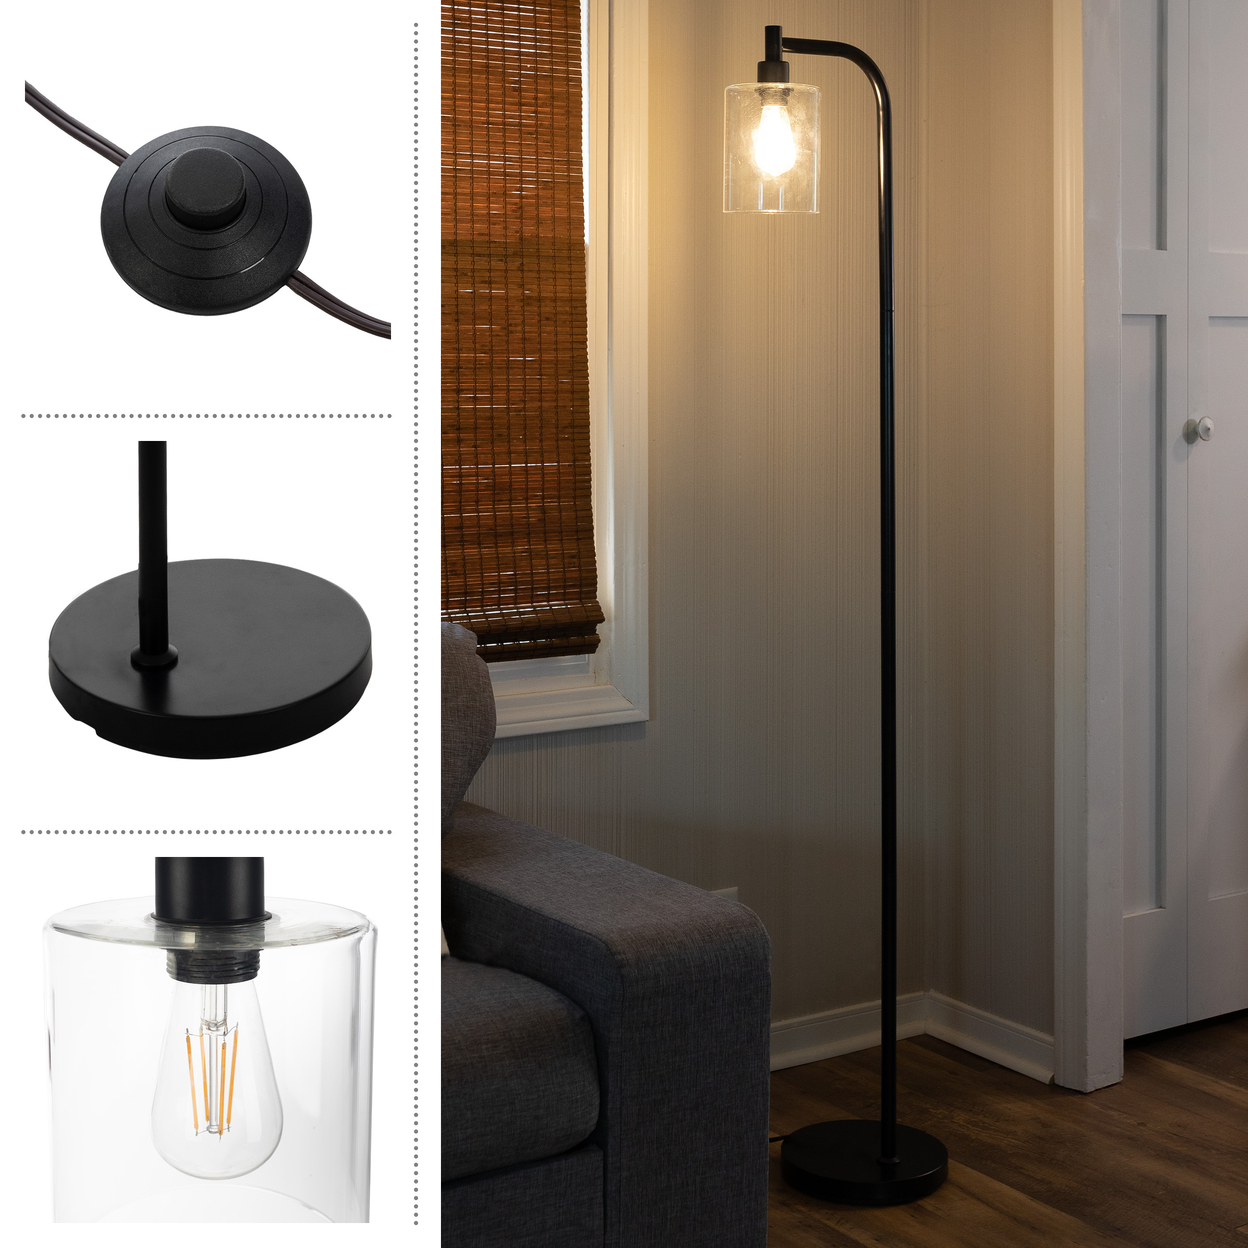 Floor Lamp Room Decor 65in Tall Modern Floor Lamp With Glass Shade And LED Bulb